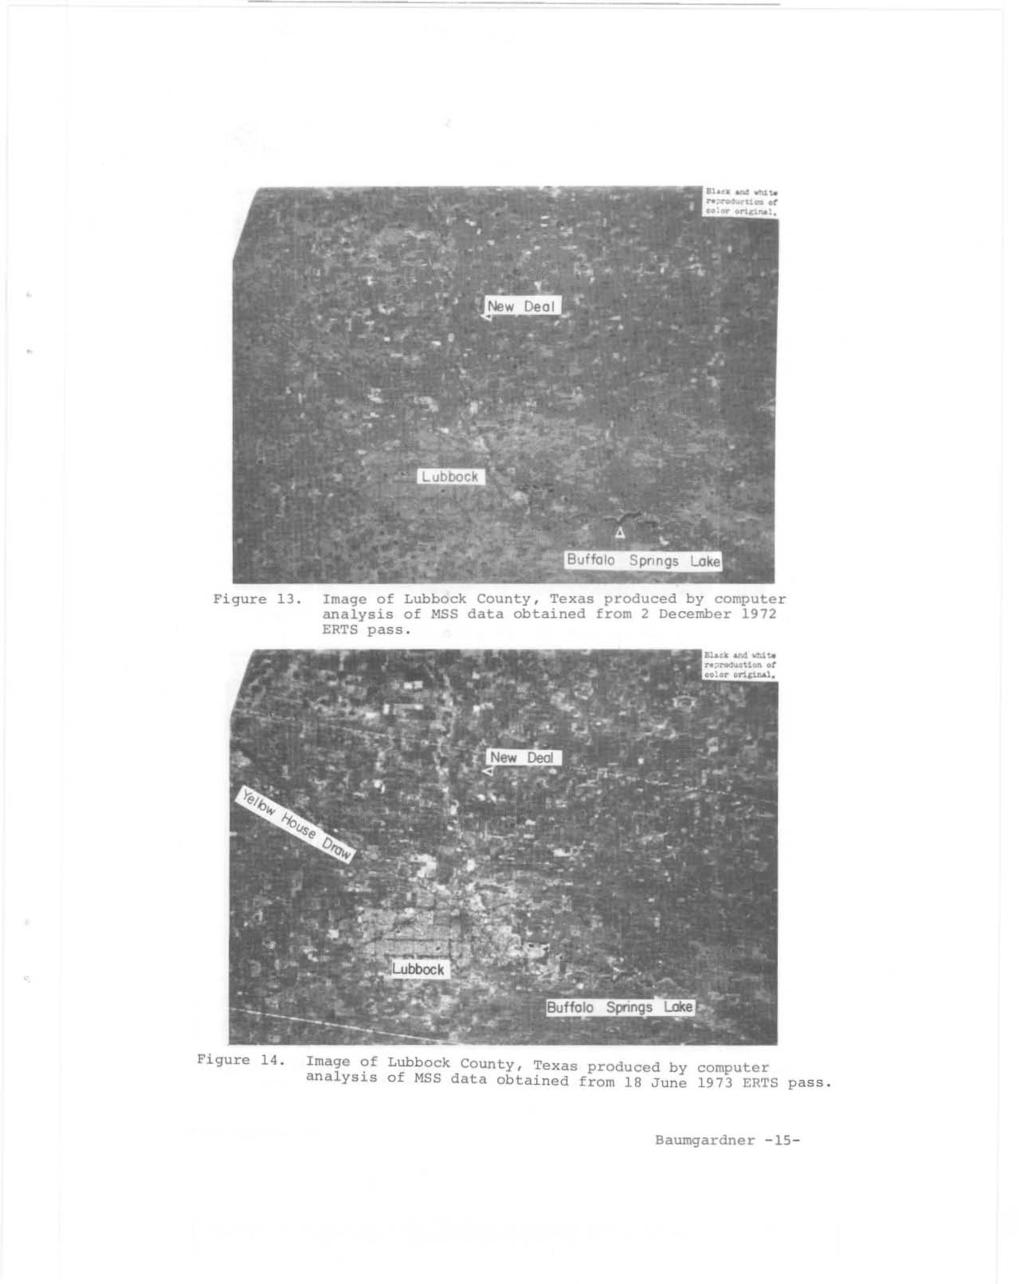 Figure 13. Image of Lubbock County, Texas produced by computer analysis of MSS data obtained from 2 December 1972 ERTS pass.